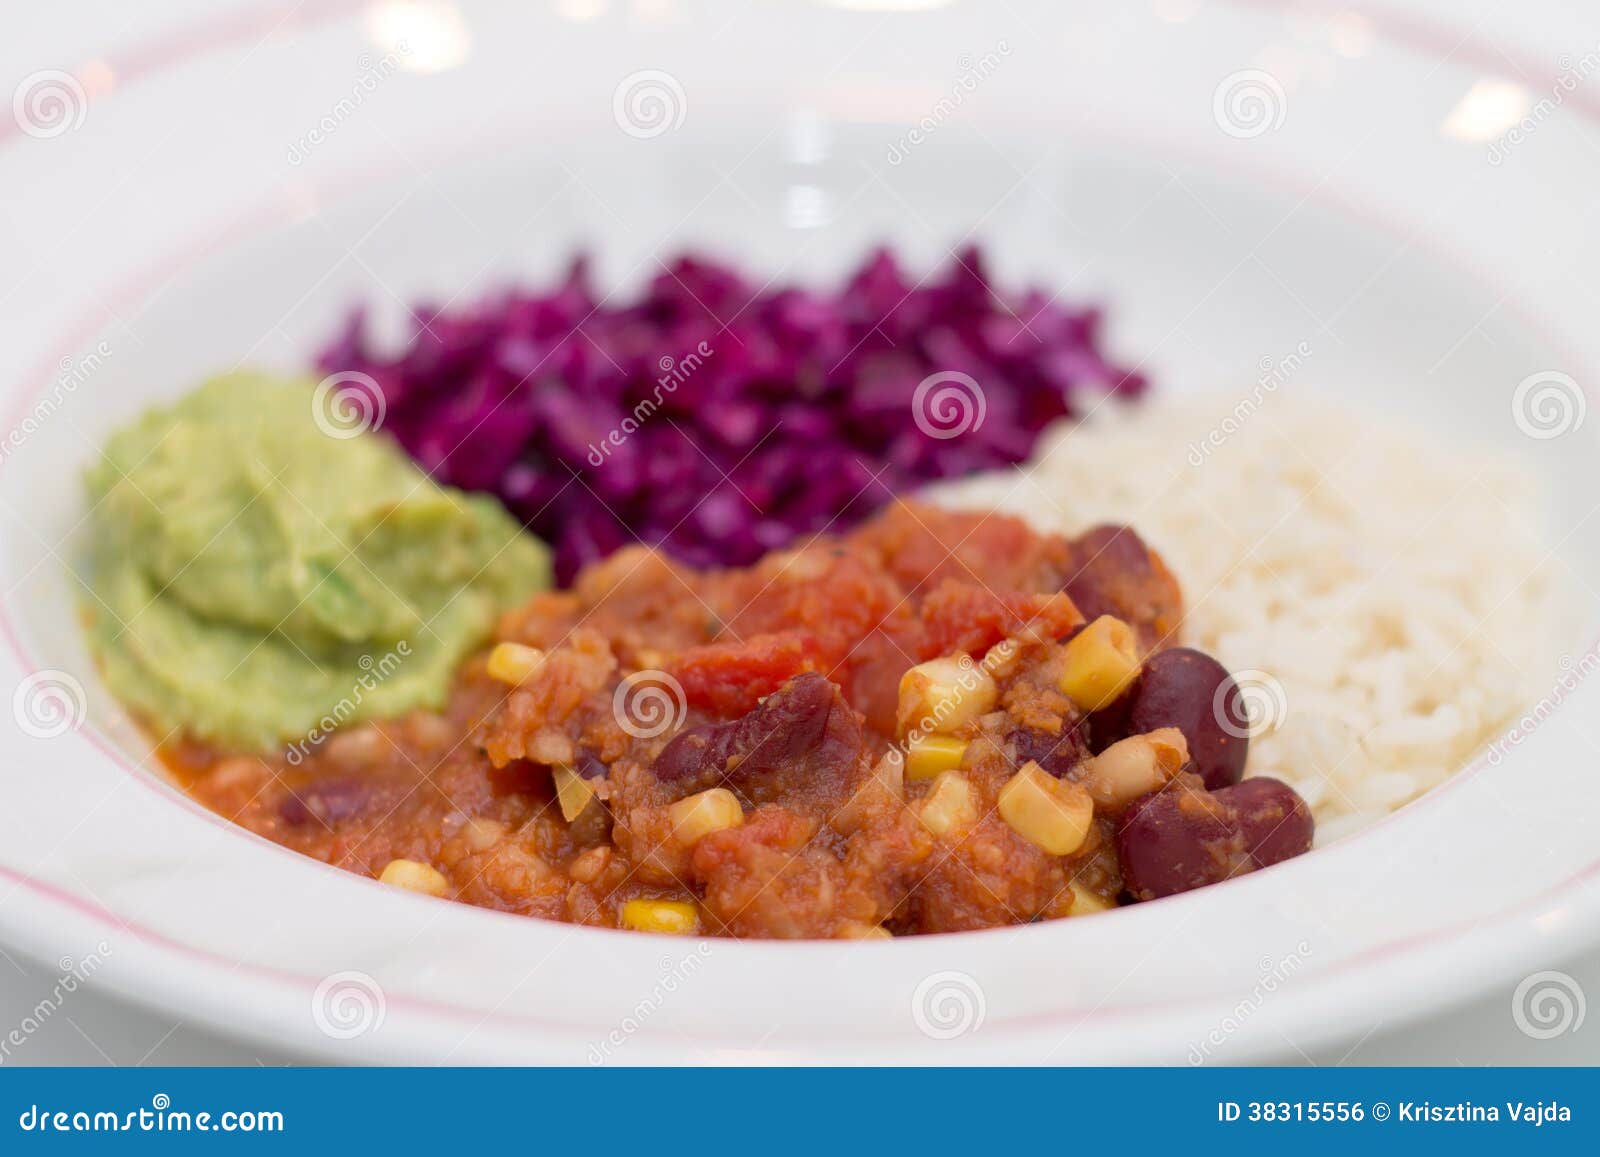 white plate of chili sin carne with red cabbage, guacamole and r